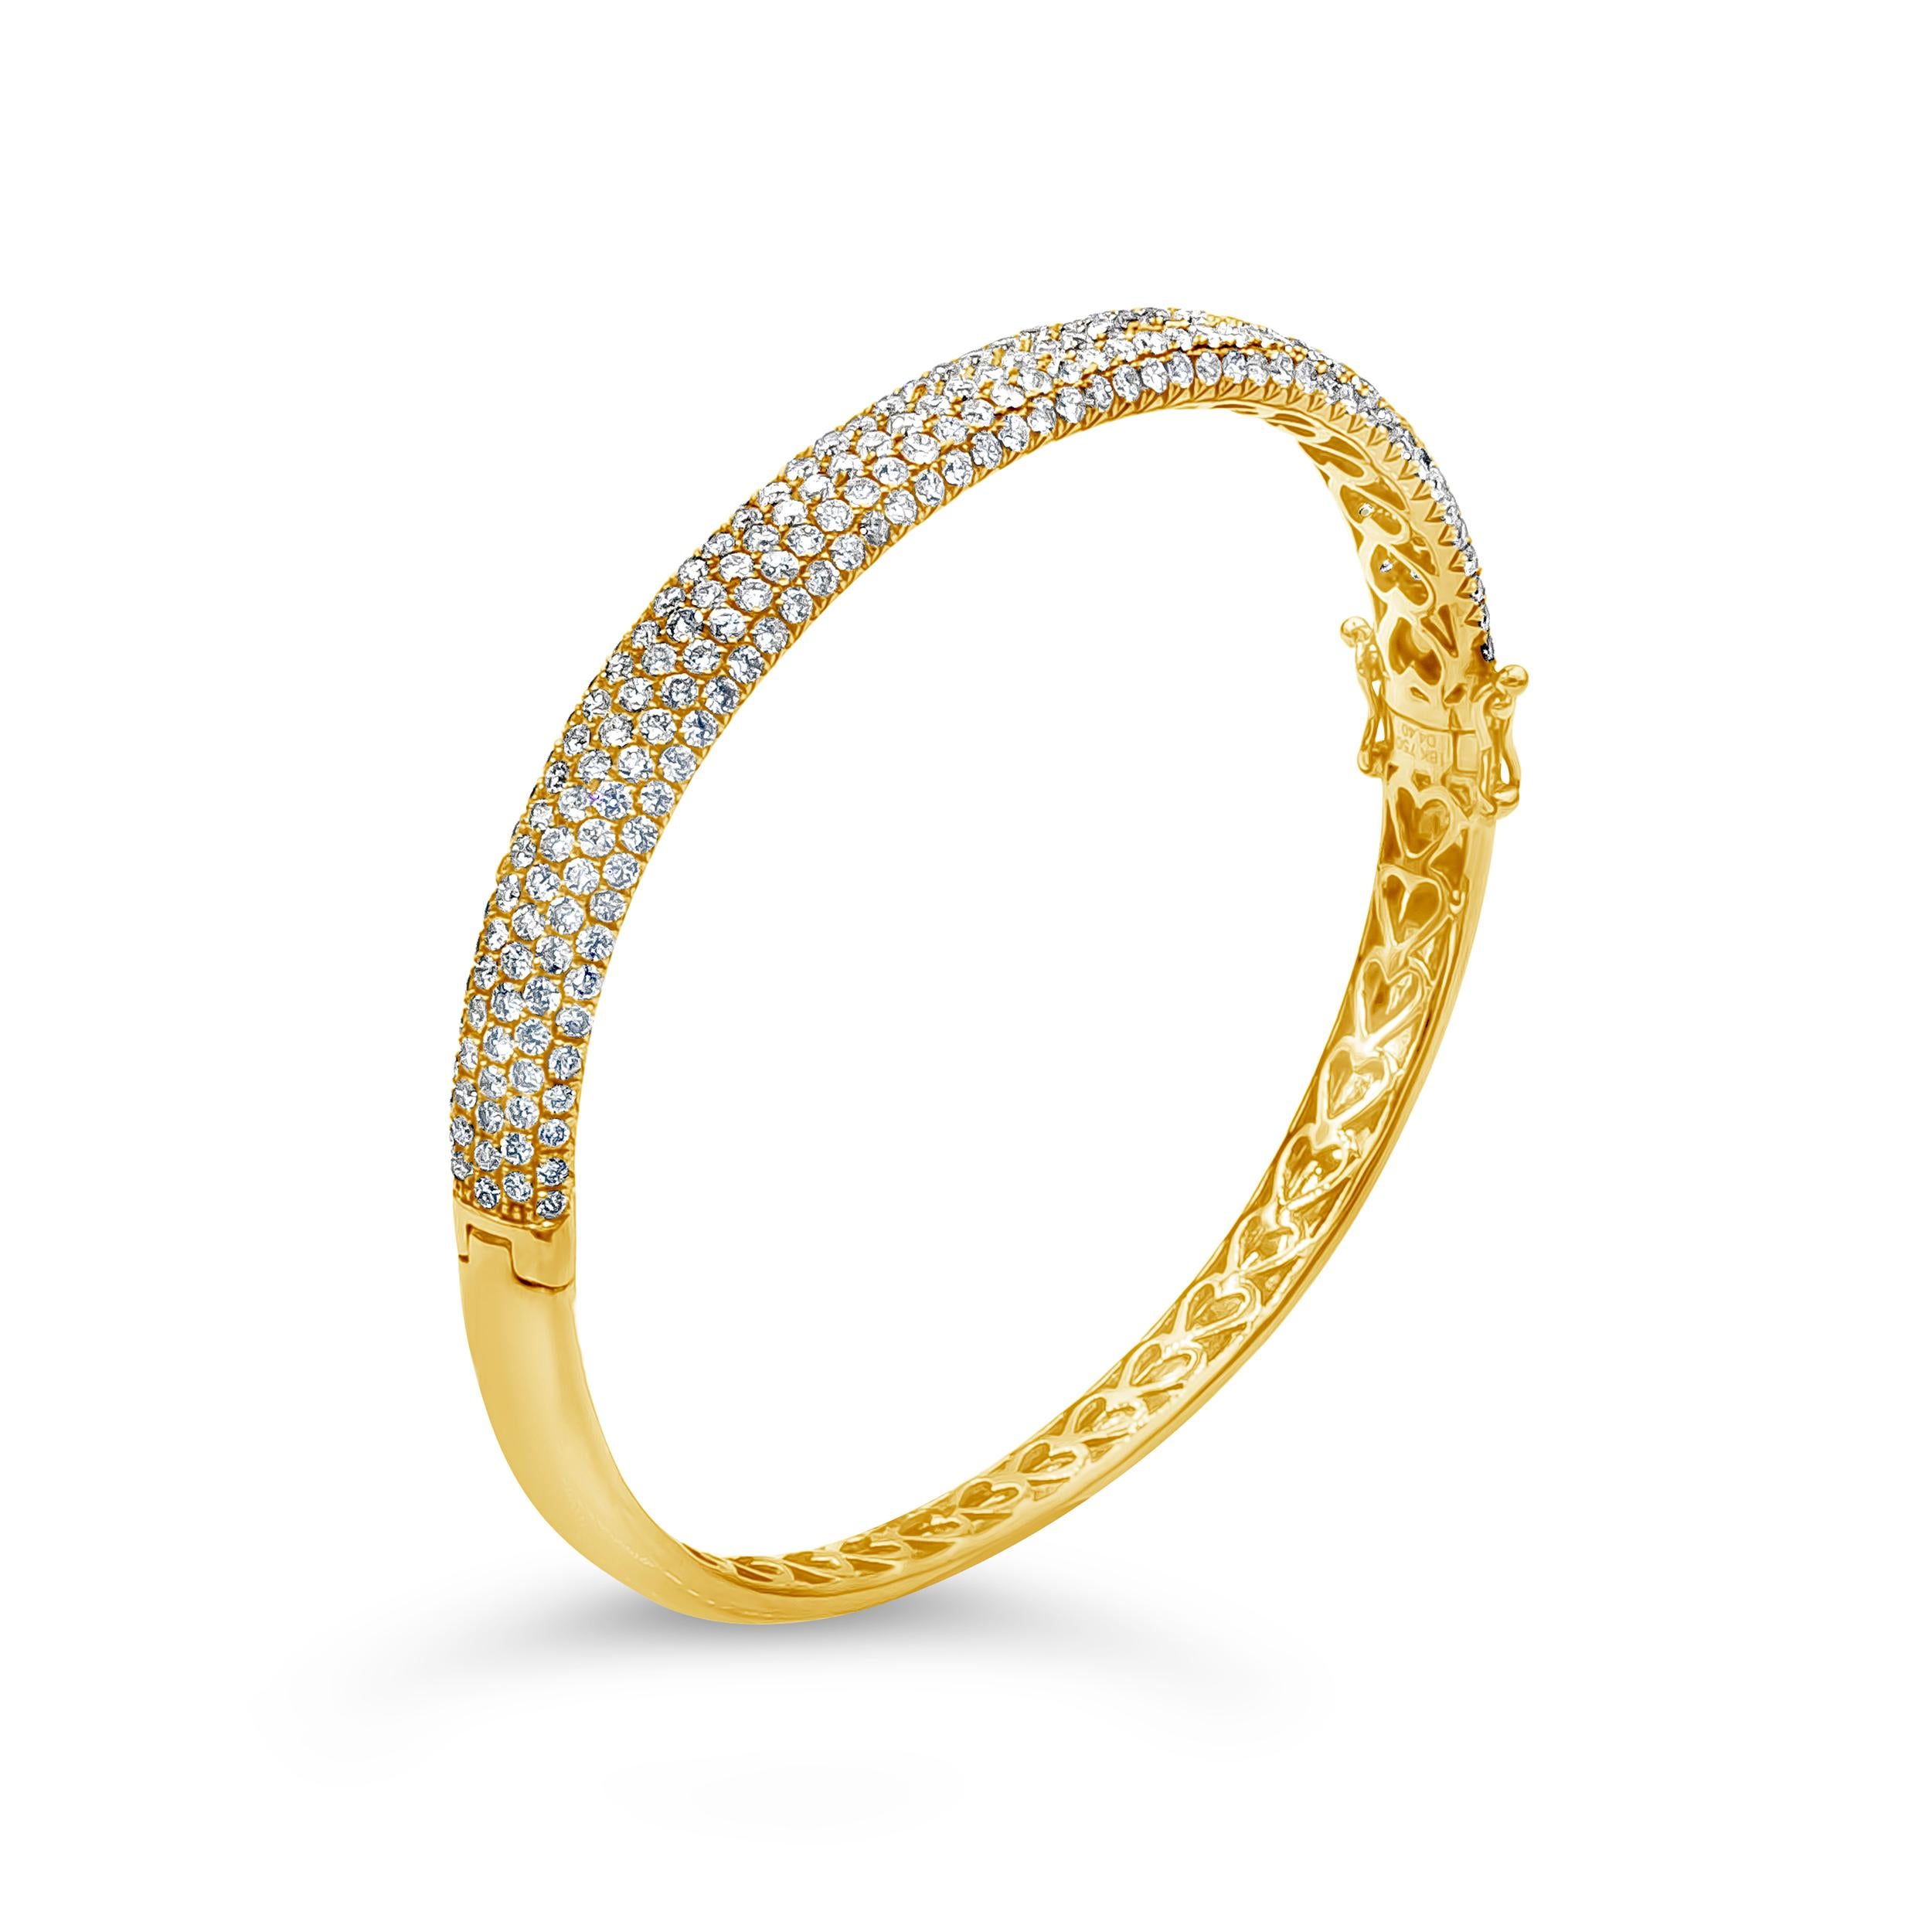 Showcasing a beautiful concave bangle bracelet micro-pave set with 250 round brilliant diamonds. Diamonds weigh 4.40 carats total. Made in 18K Yellow Gold.

Roman Malakov is a custom house, specializing in creating anything you can imagine. If you